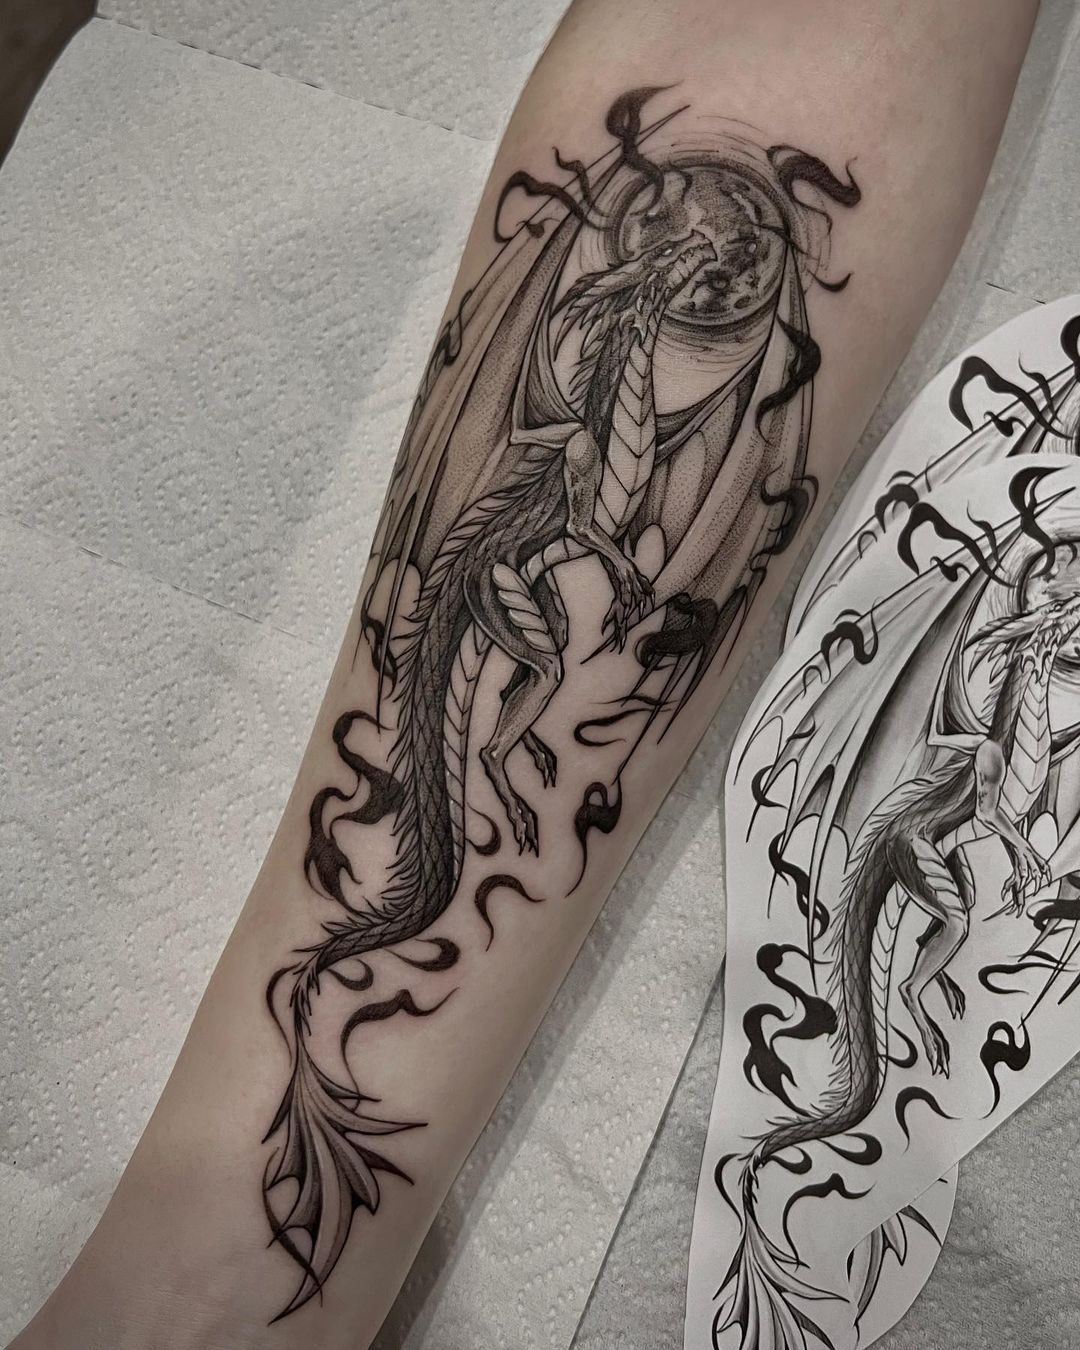 Black and gray dragon tattoo by zlukness